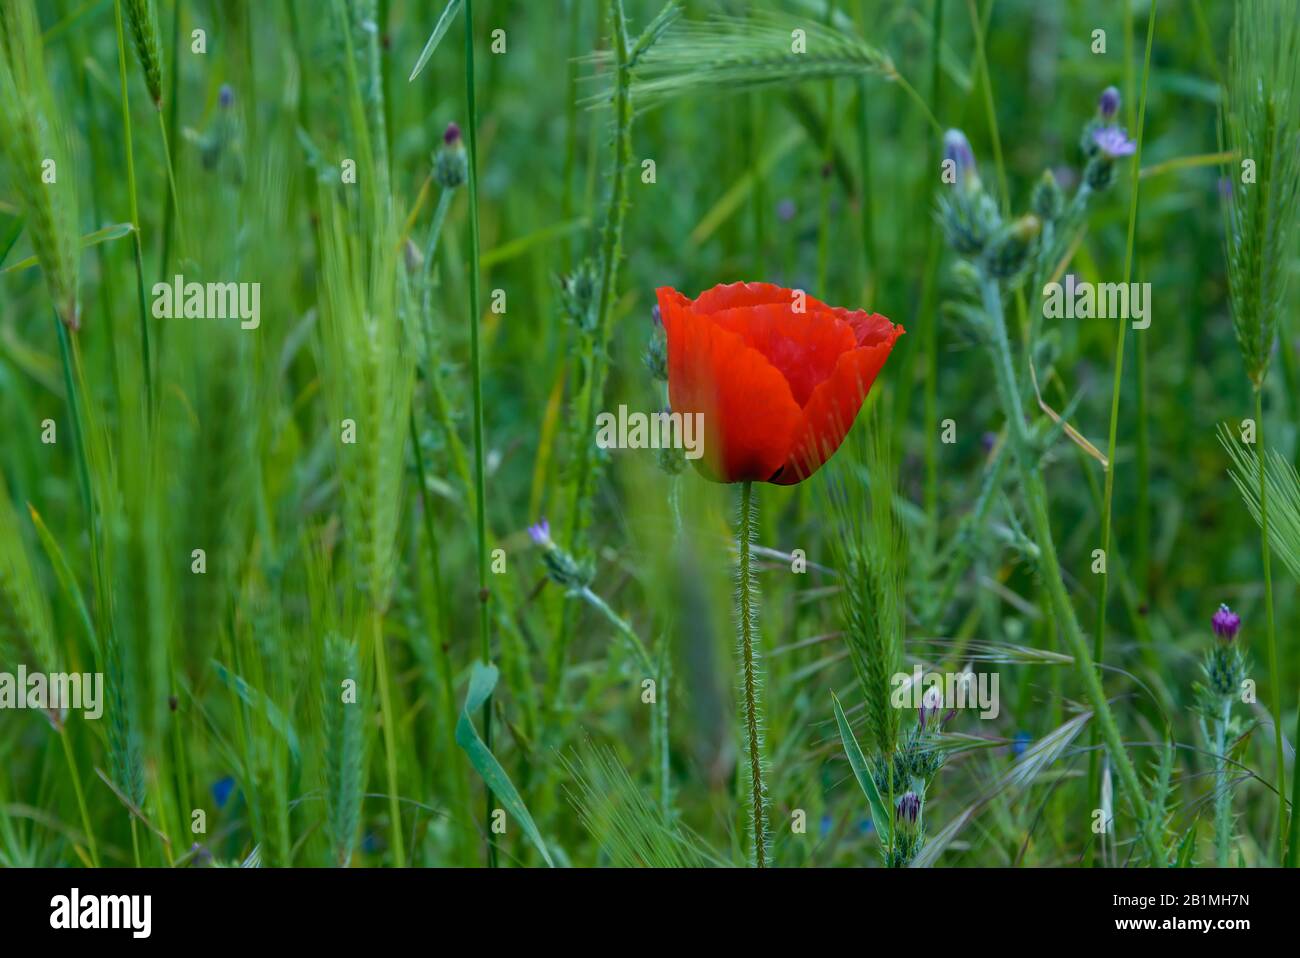 Red poppy flower on a background of green grass Stock Photo